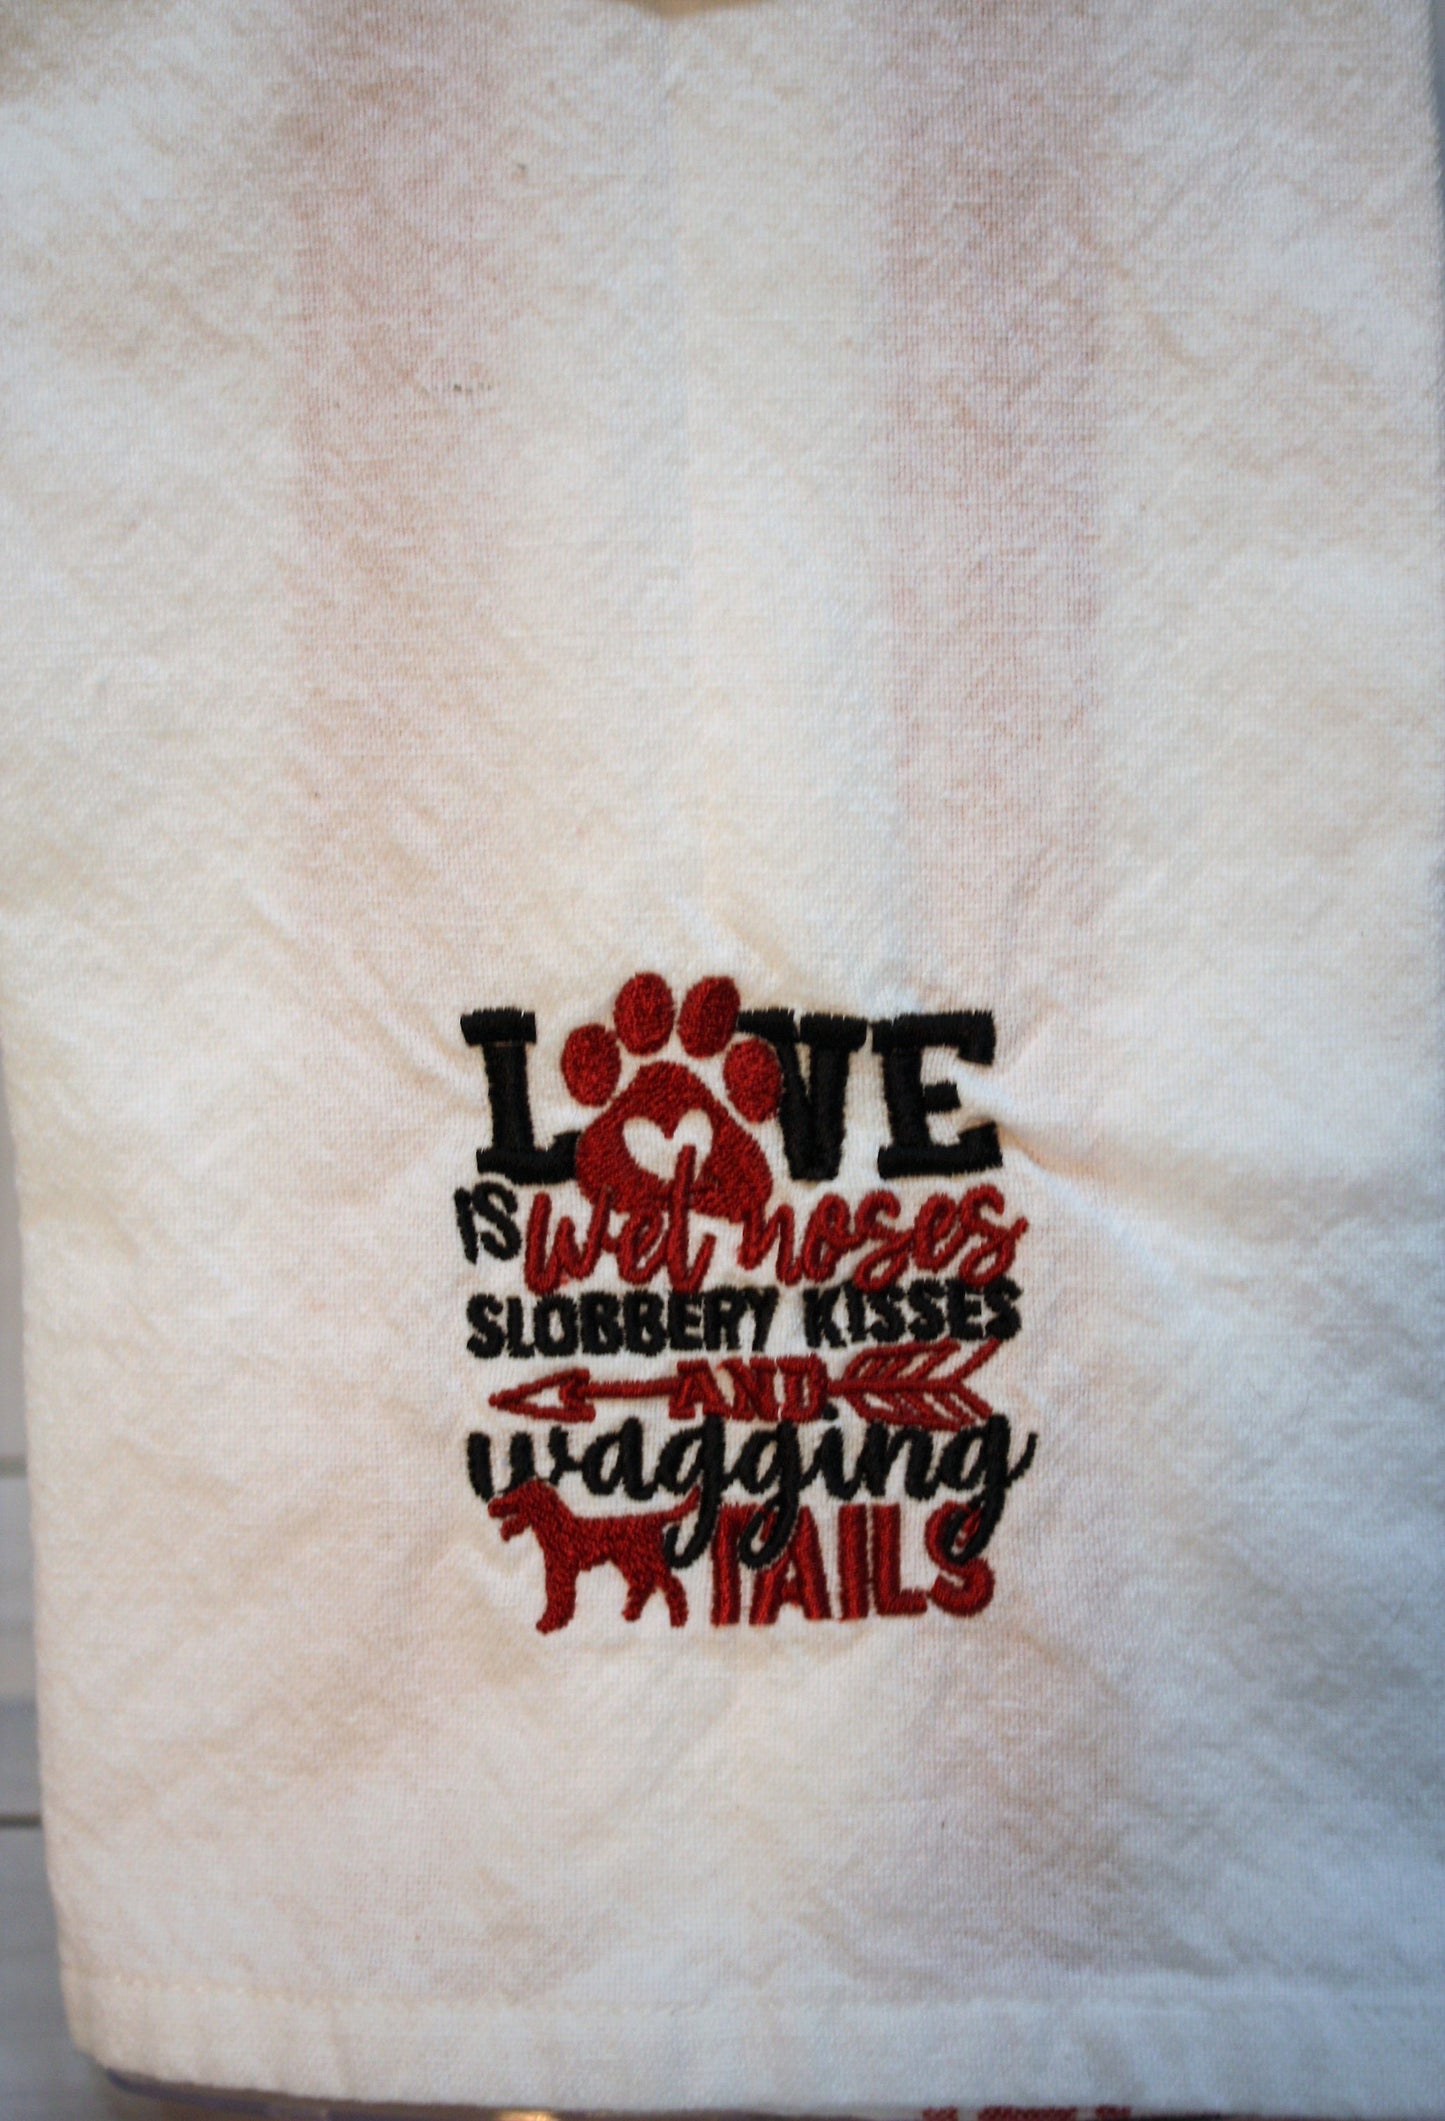 Love is Wet Noses, Slobbery Kisses & Wagging Tails Towel